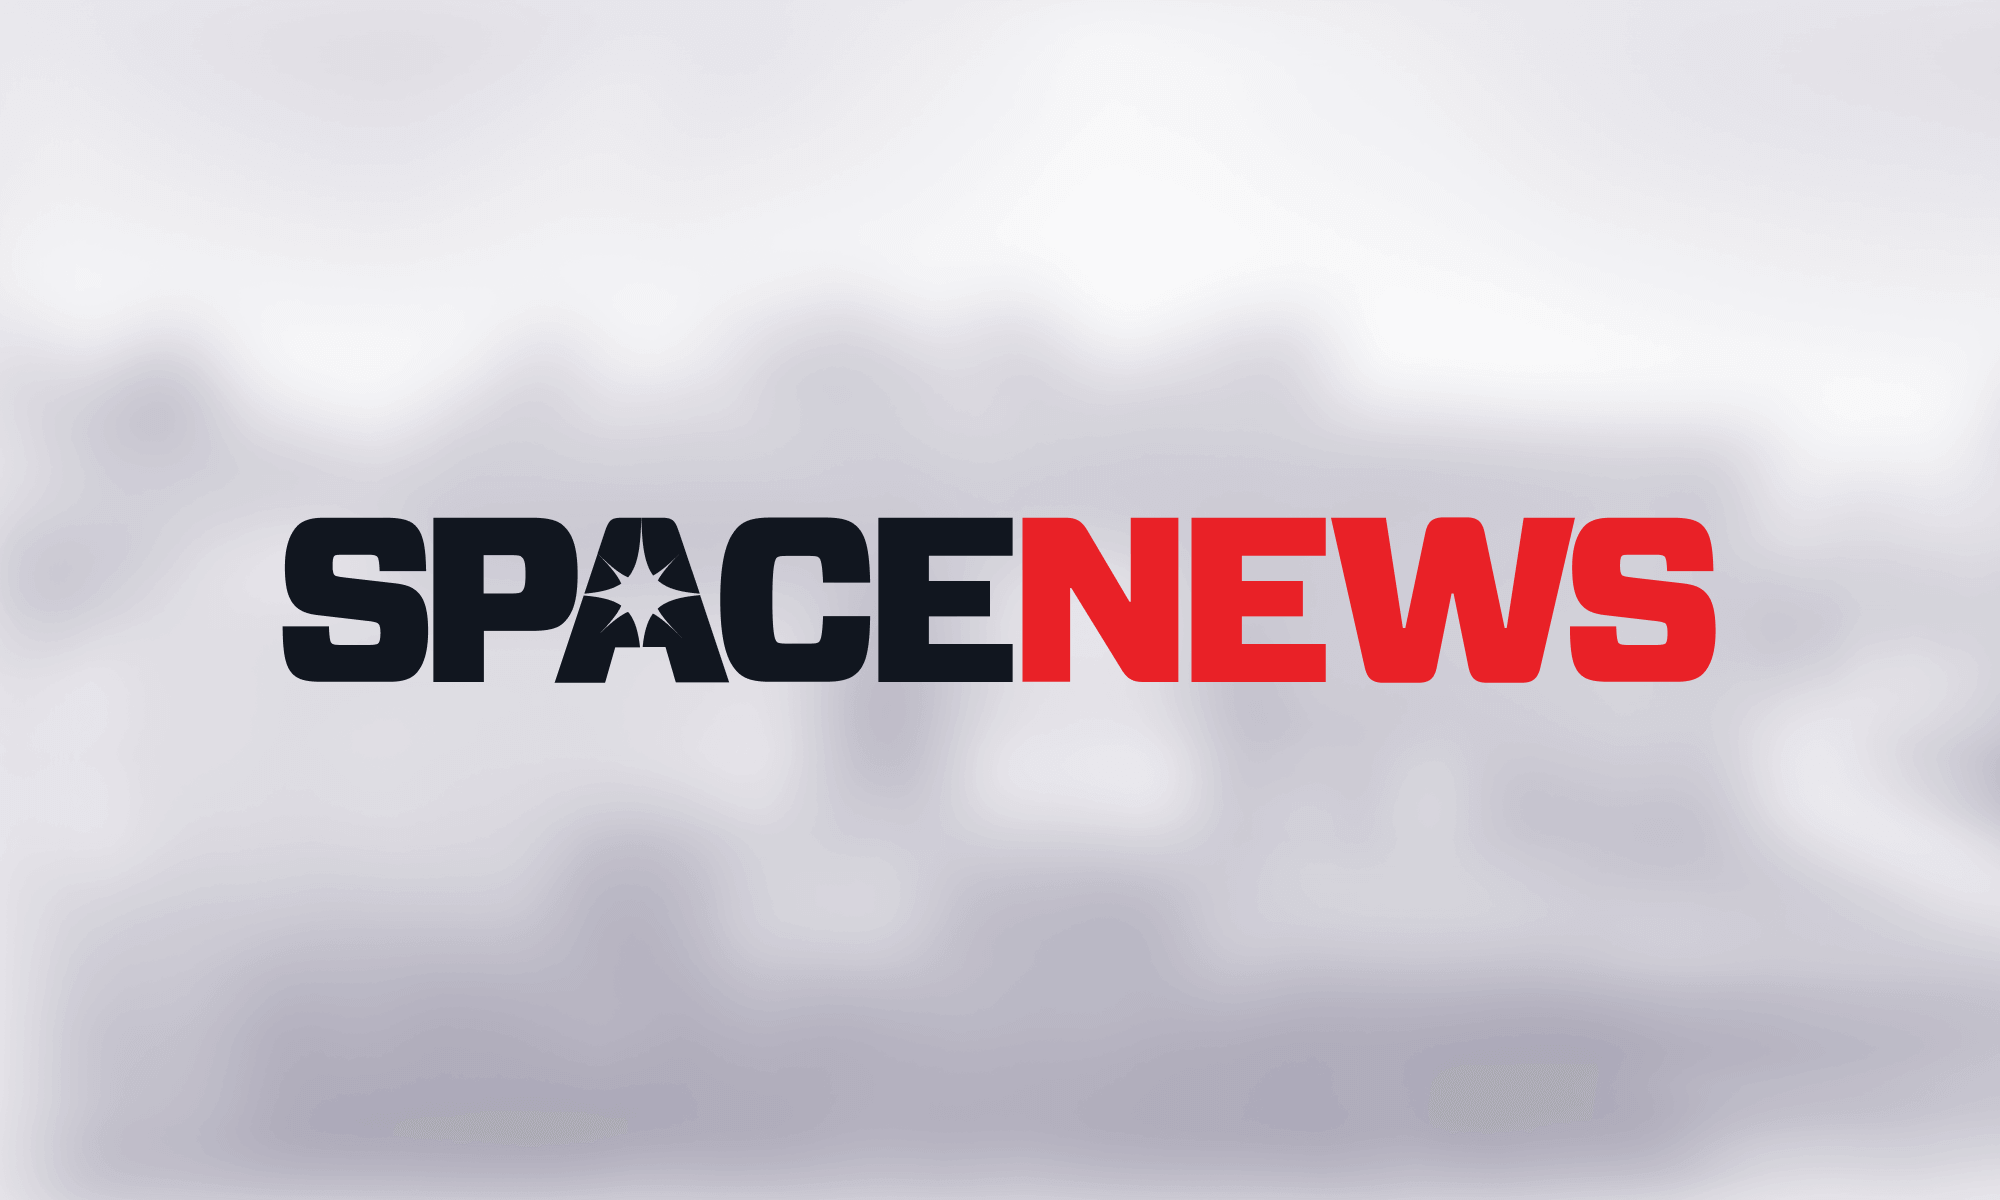 News cover image for Space News